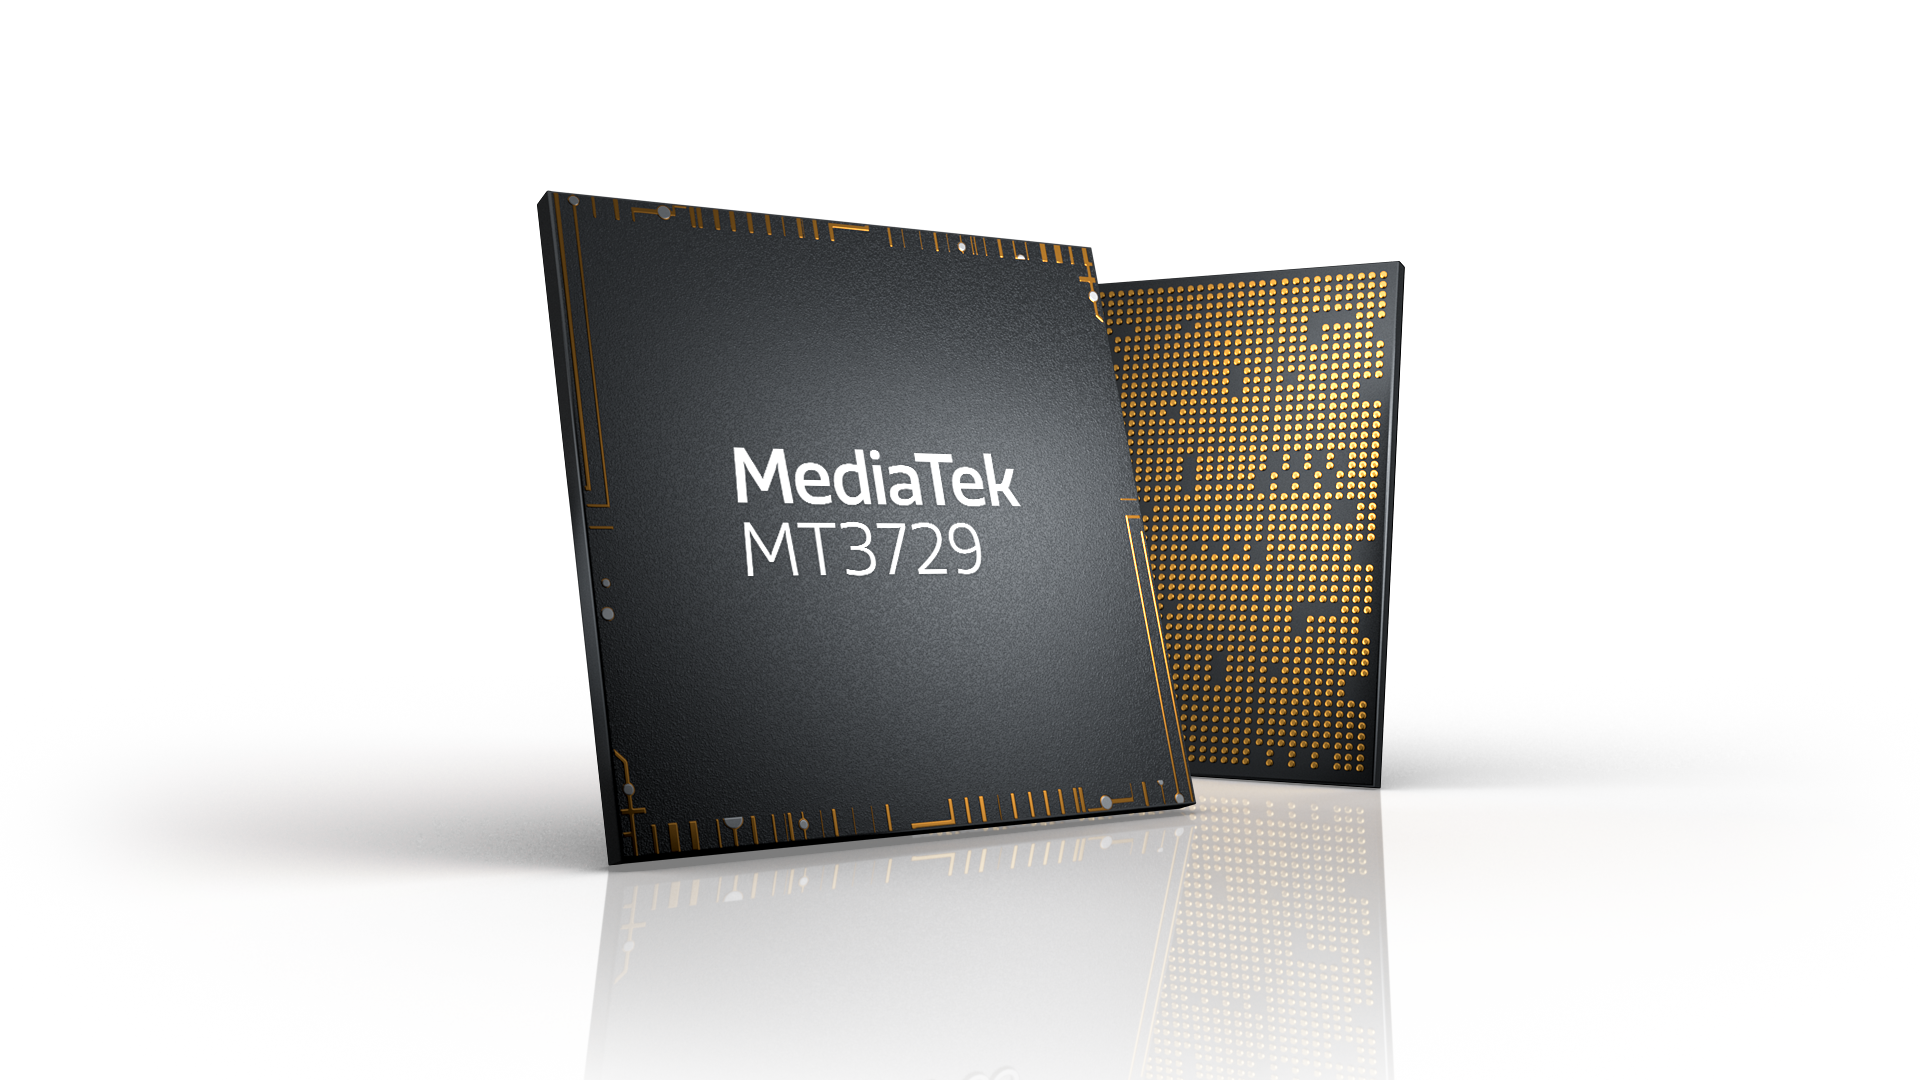 MediaTek’s First Ultra-low Power 800GbE MACsec PHYs MT3729 Designed for Data Centers and 5G Infrastructure